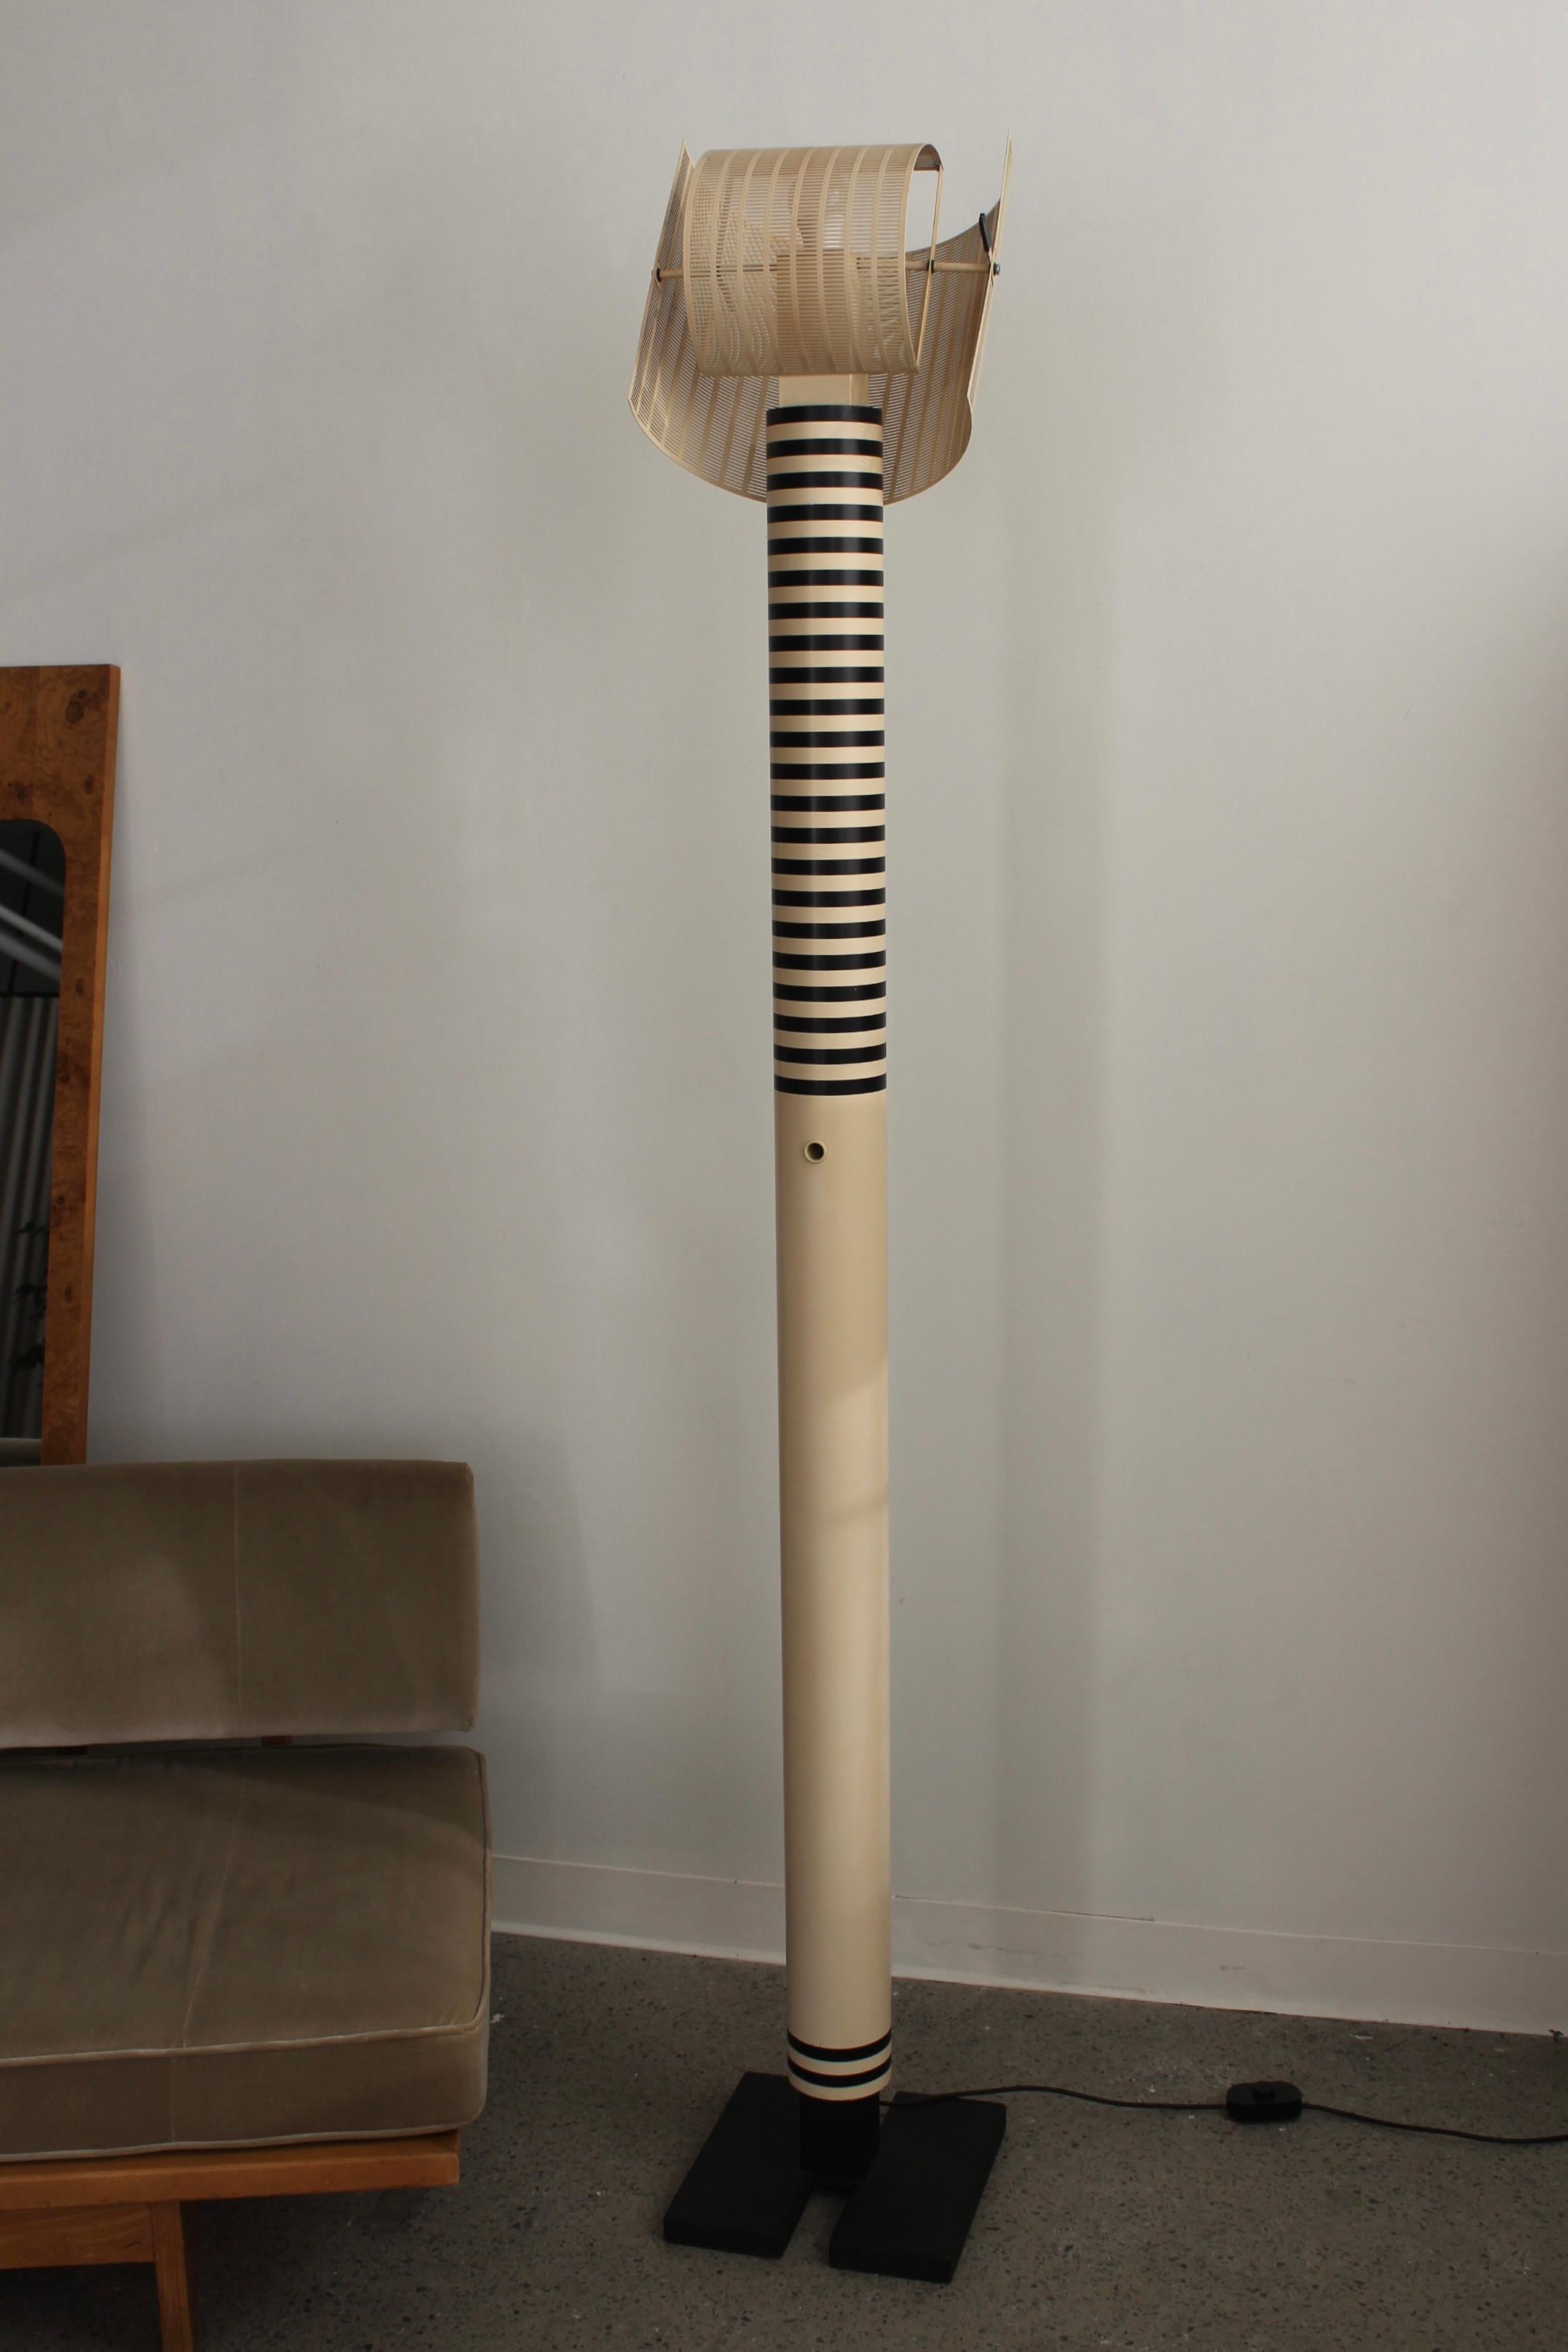 Shogun Terra Floor Lamp by Mario Botta for Artemide, 1980s. Cast iron base, cream coloured steel shaft with black stripes. Two curved perforated shades can be adjusted to create a variation of light partition.

In good condition, two markings on